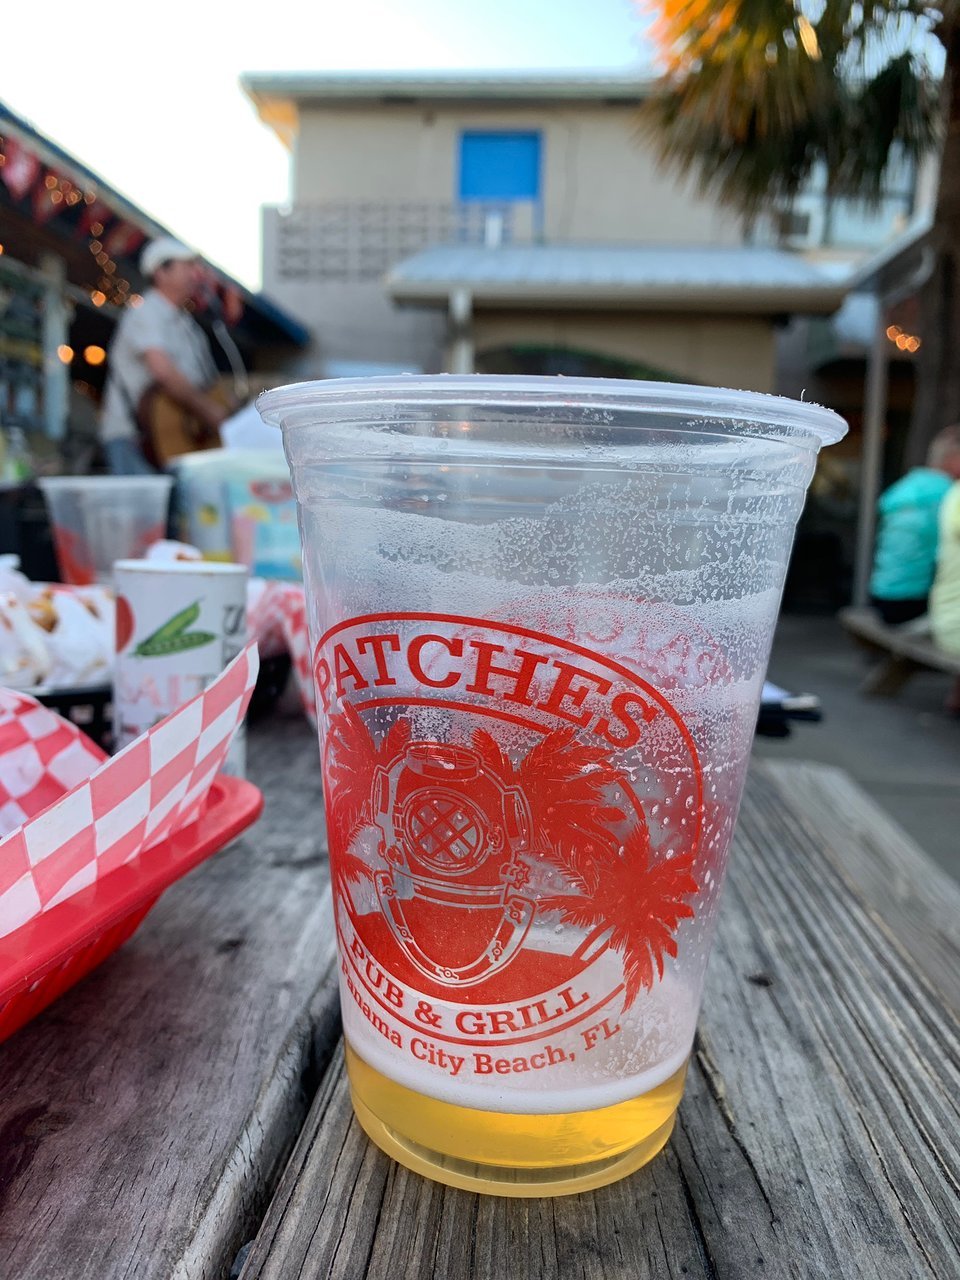 Patches Pub & Grill